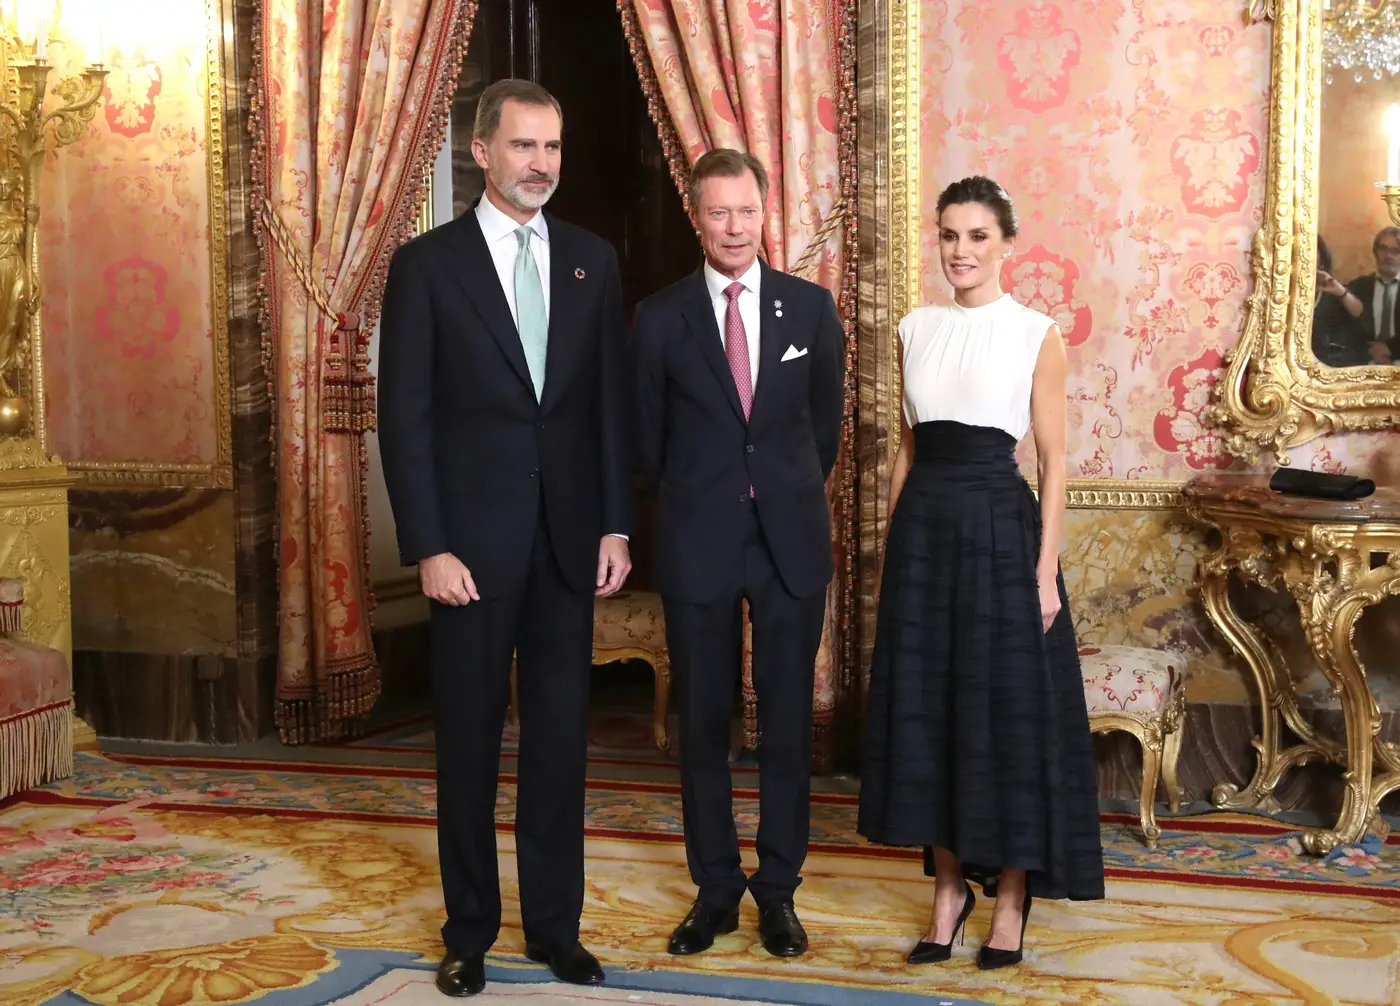 Queen Letizia of Spain chose a black and white look for Climate Change Recption at the Palace